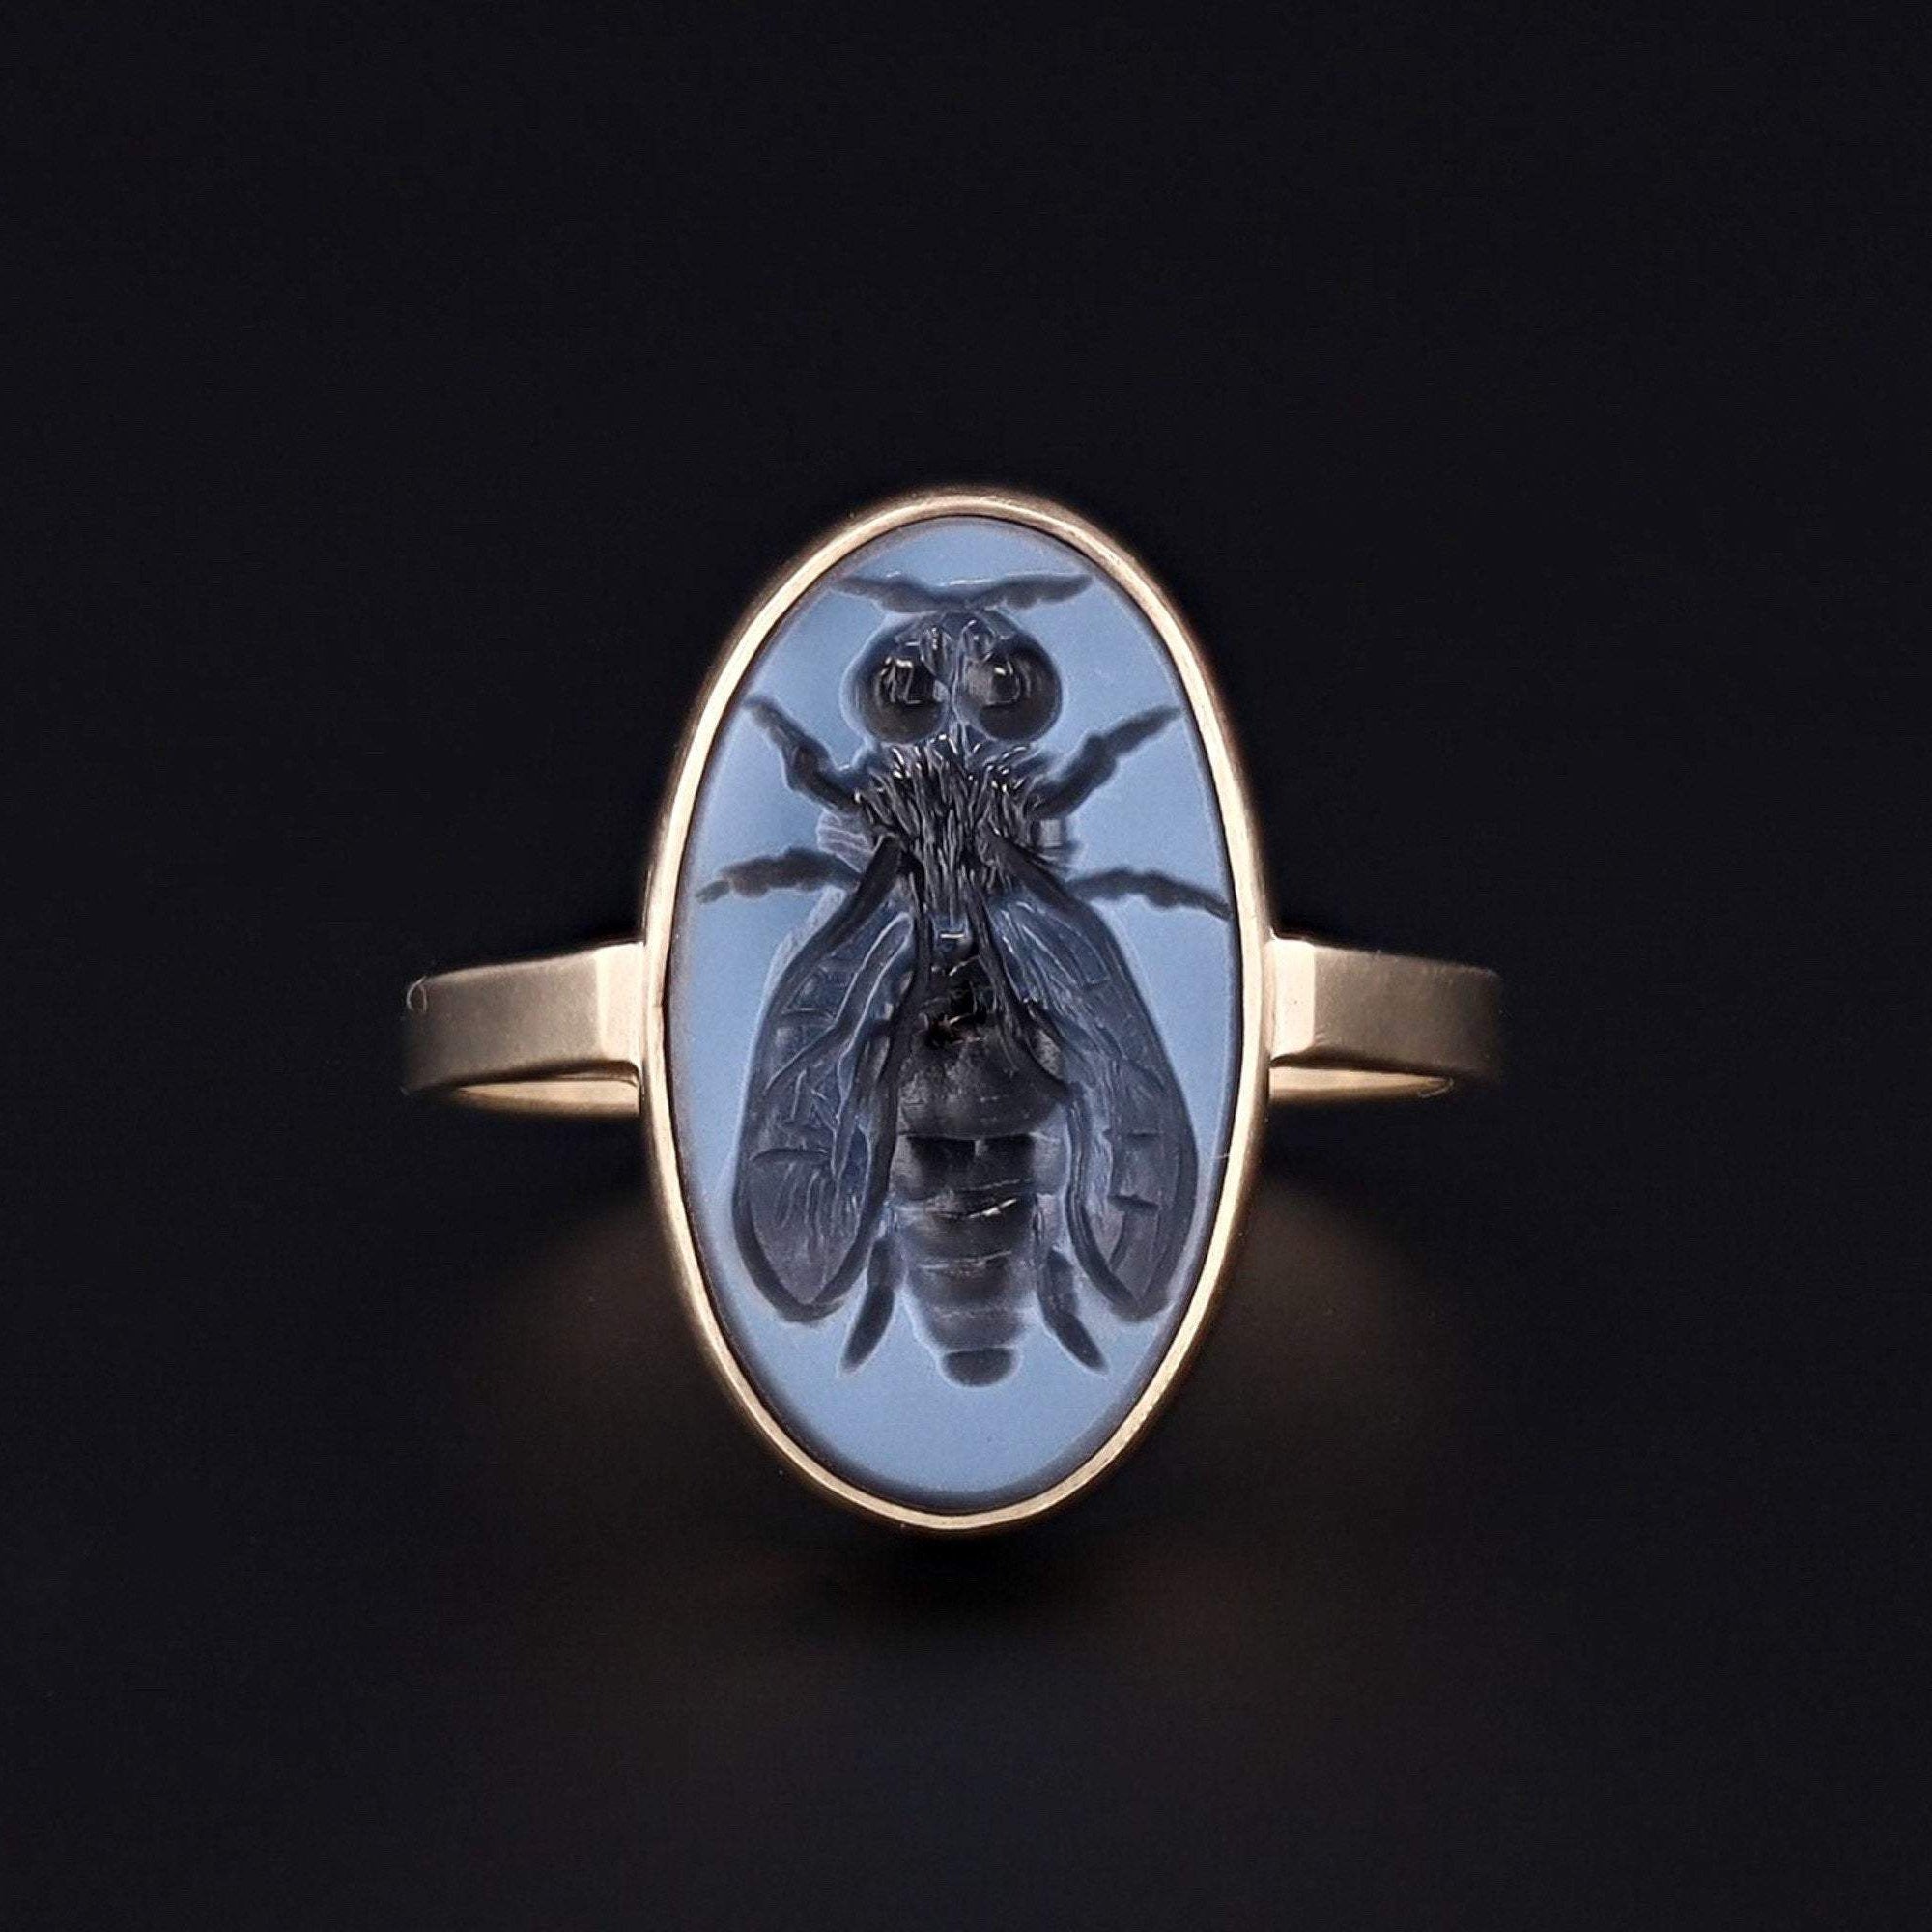 Bee Ring | Intaglio Ring | Black and White Agate Intaglio Ring | 14k Gold Ring